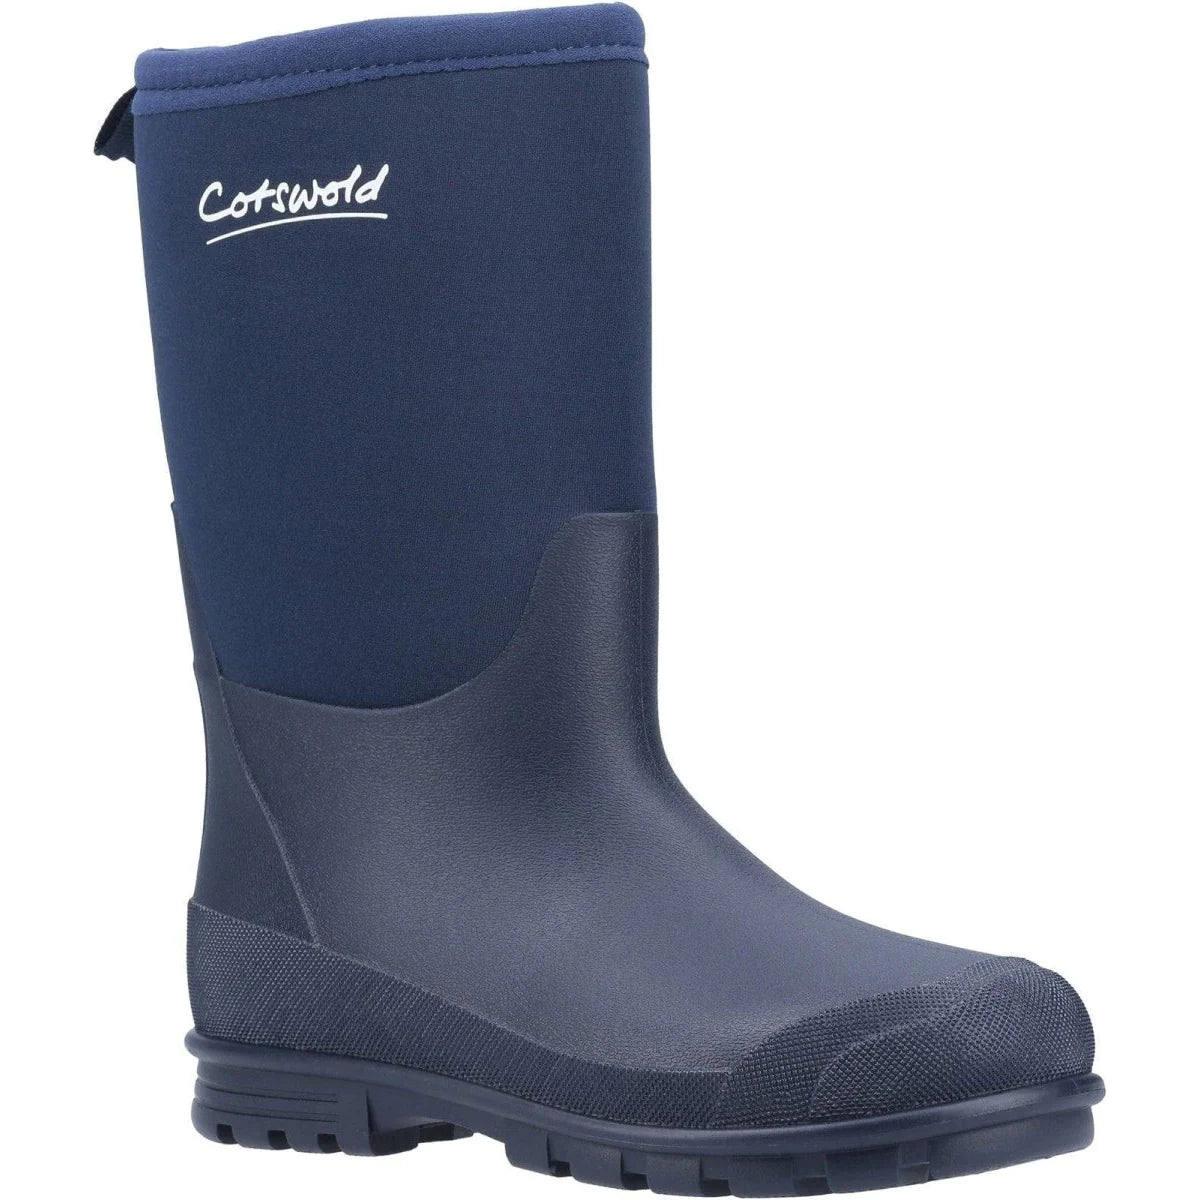 Cotswold Hilly Kids Neoprene Wellington Boots - Shoe Store Direct